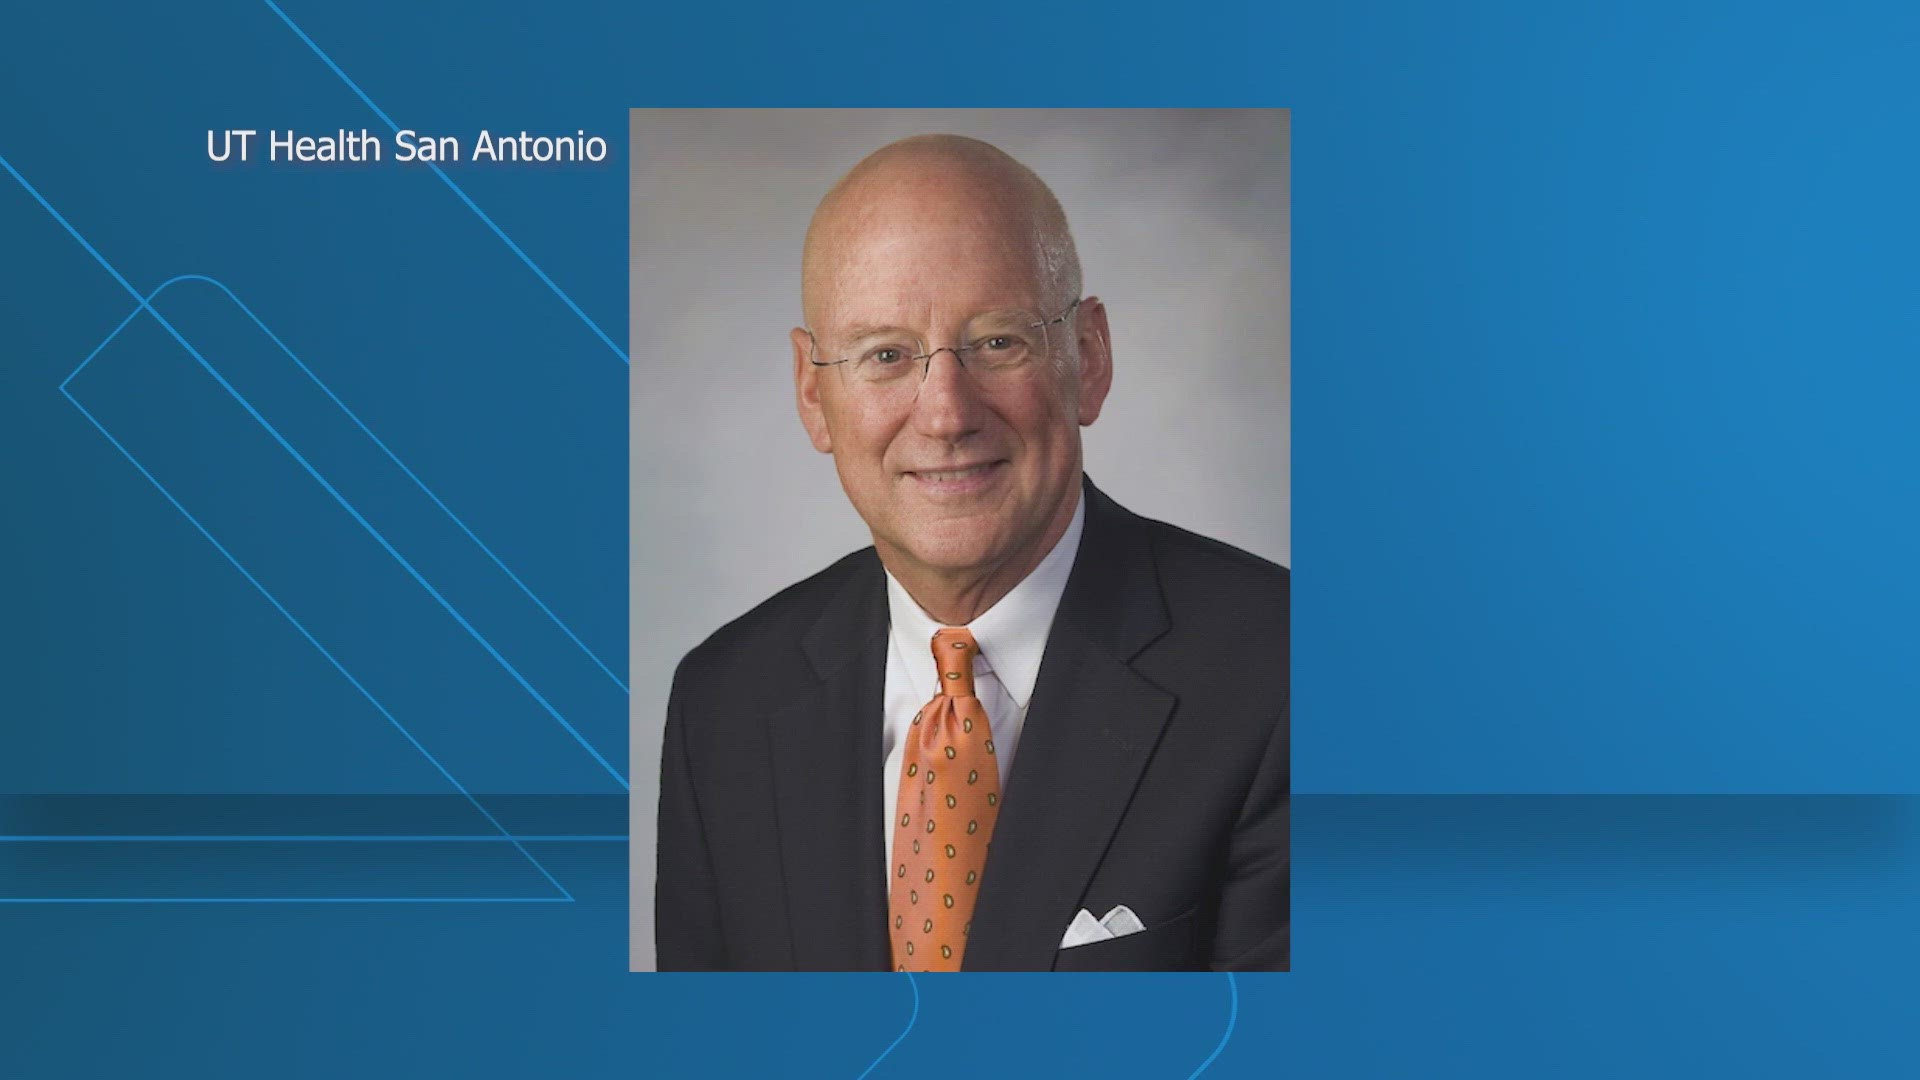 William Henrich served as dean of the medical school and vice president of medical affairs at UT Health San Antonio before being appointed in 2009.